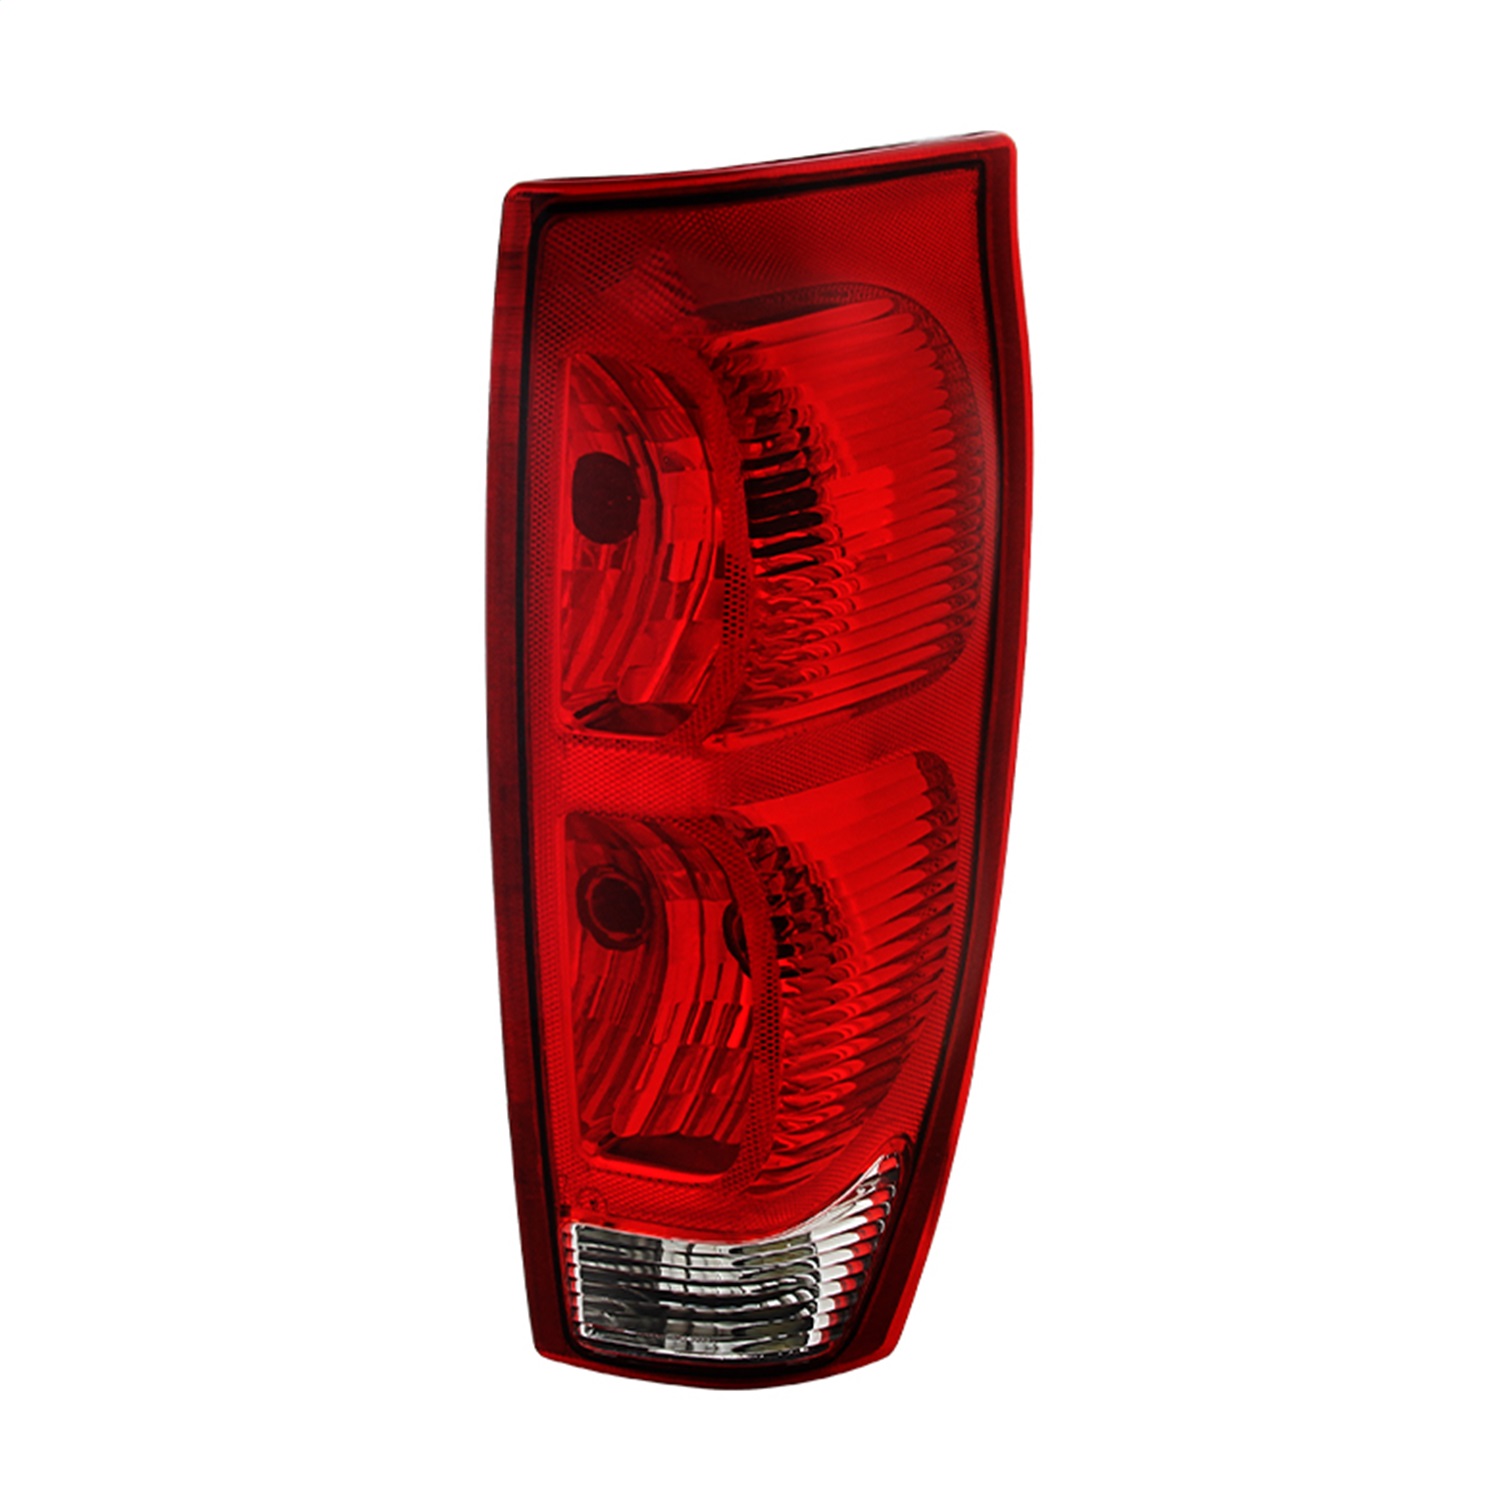 Spyder Auto 9030895 XTune Tail Light Fits 02-06 Avalanche 1500 Avalanche 2500